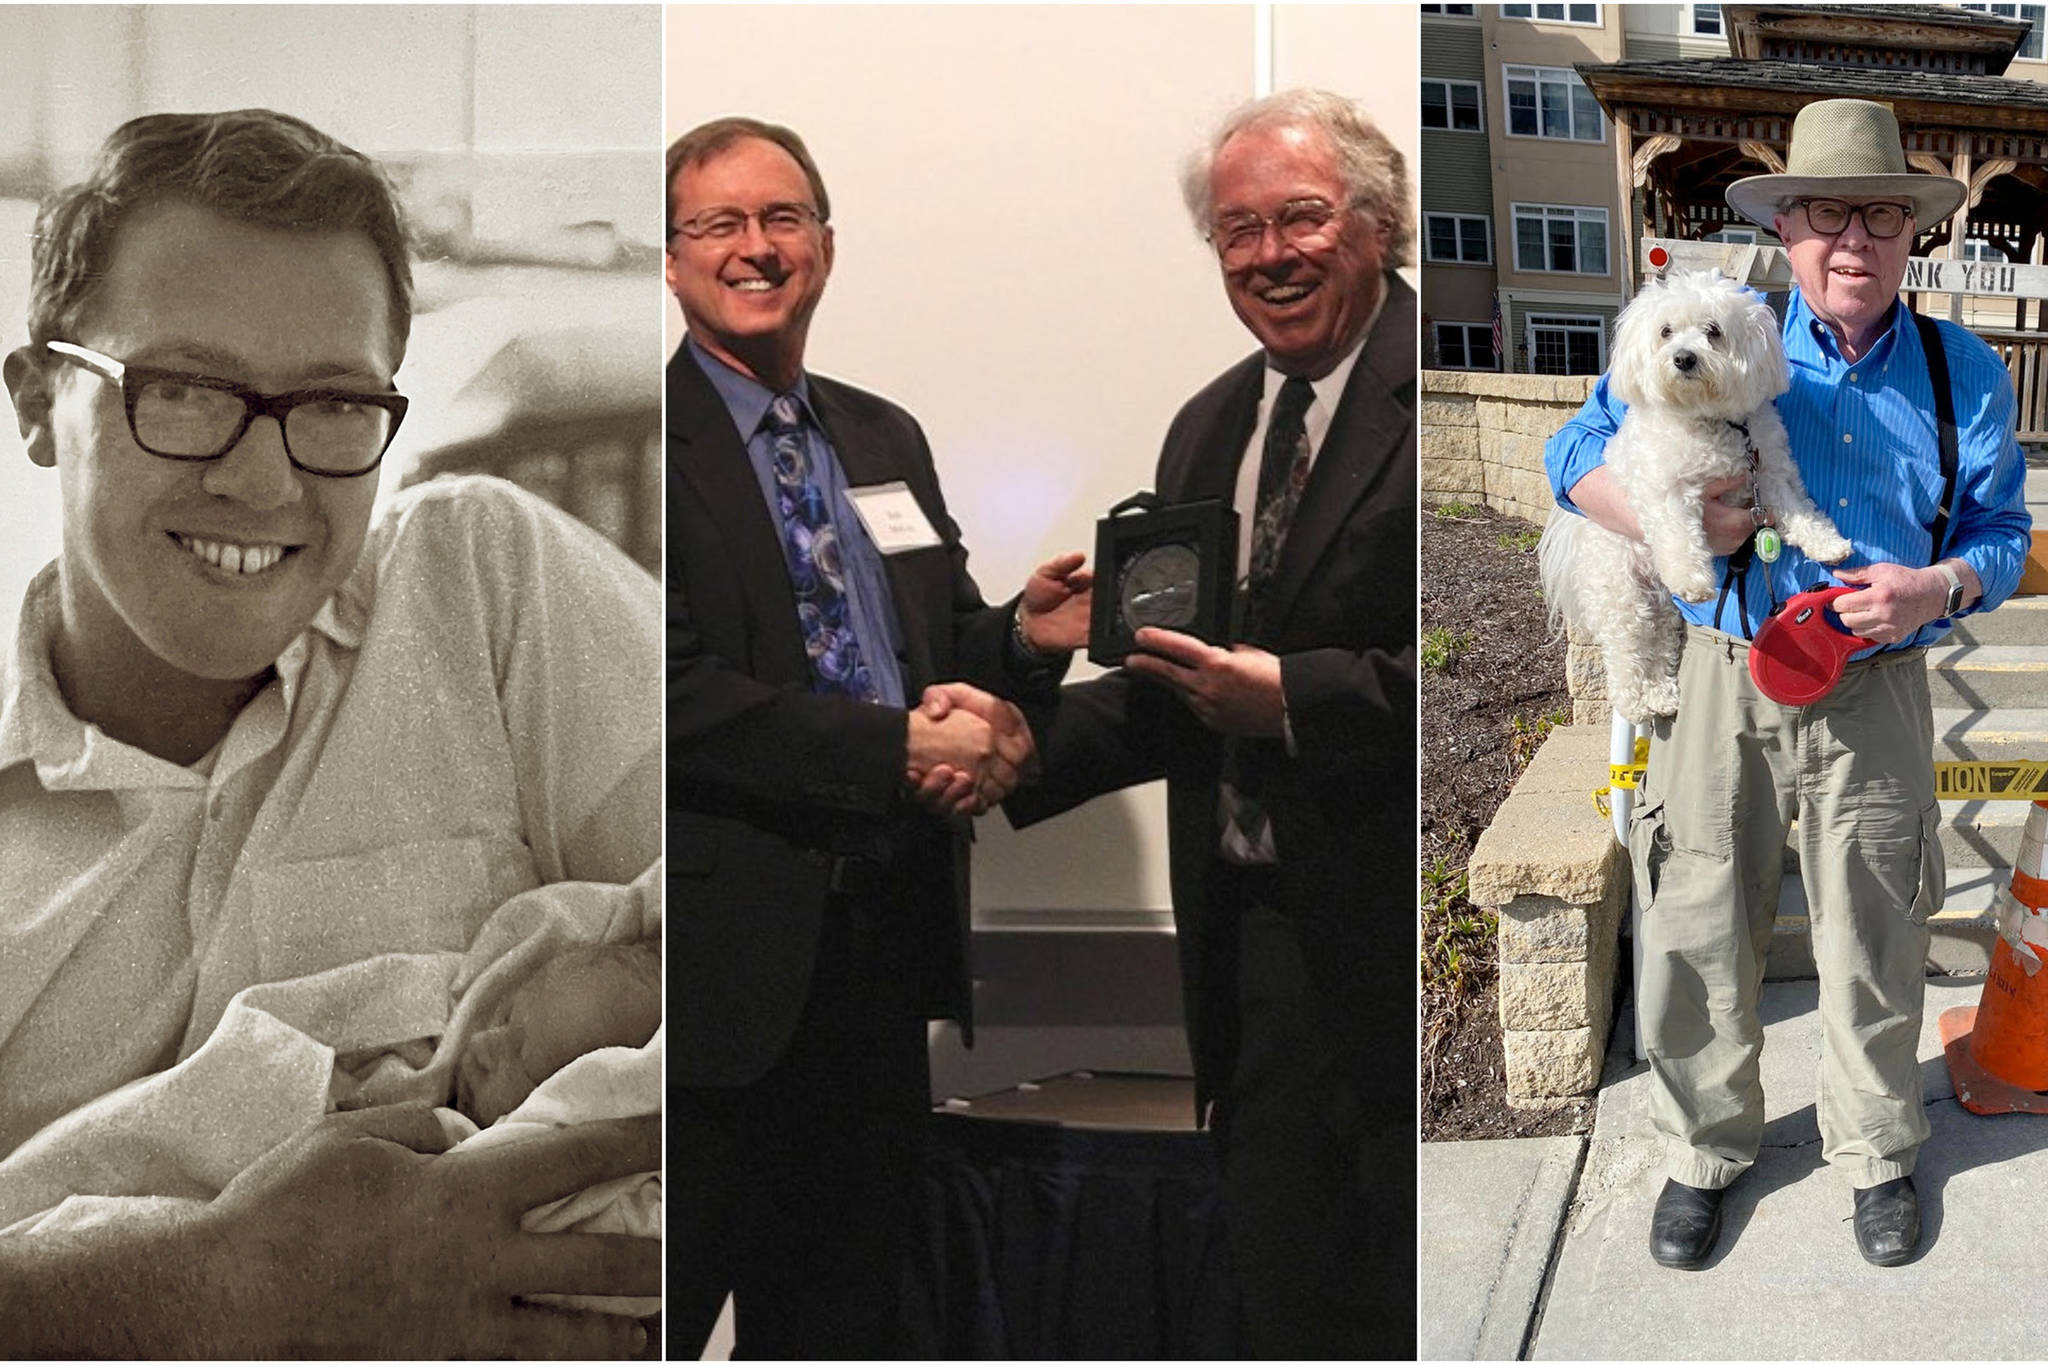 Neal Brown in 1967, holding his newborn son Kris. Brown accepts the Roger Smith Lifetime Achievement award in 2016 from Geophysical Institute director Bob McCoy. Brown in 2021, on an outing in New Hampshire with his dog Molly. Courtesy Photos / Kris Brown,  Geophysical Institute, Becky Lees)